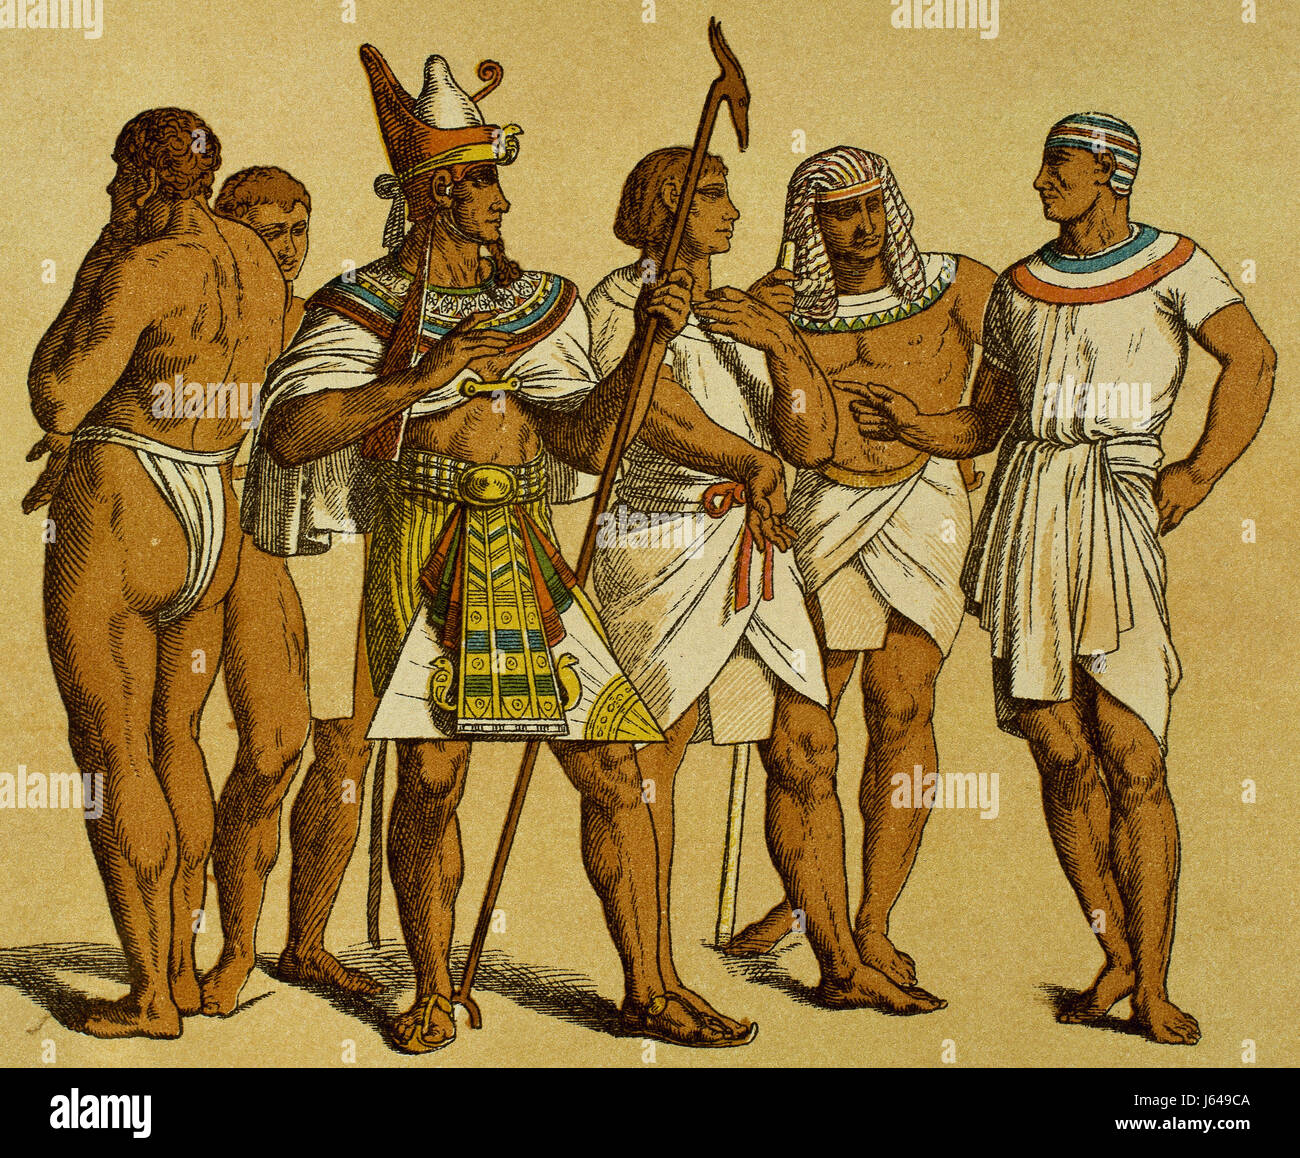 Egypt. Old Kingdom. Pharaoh, wearing the pschent or double crown, with public servants. Engraving. Color. Stock Photo